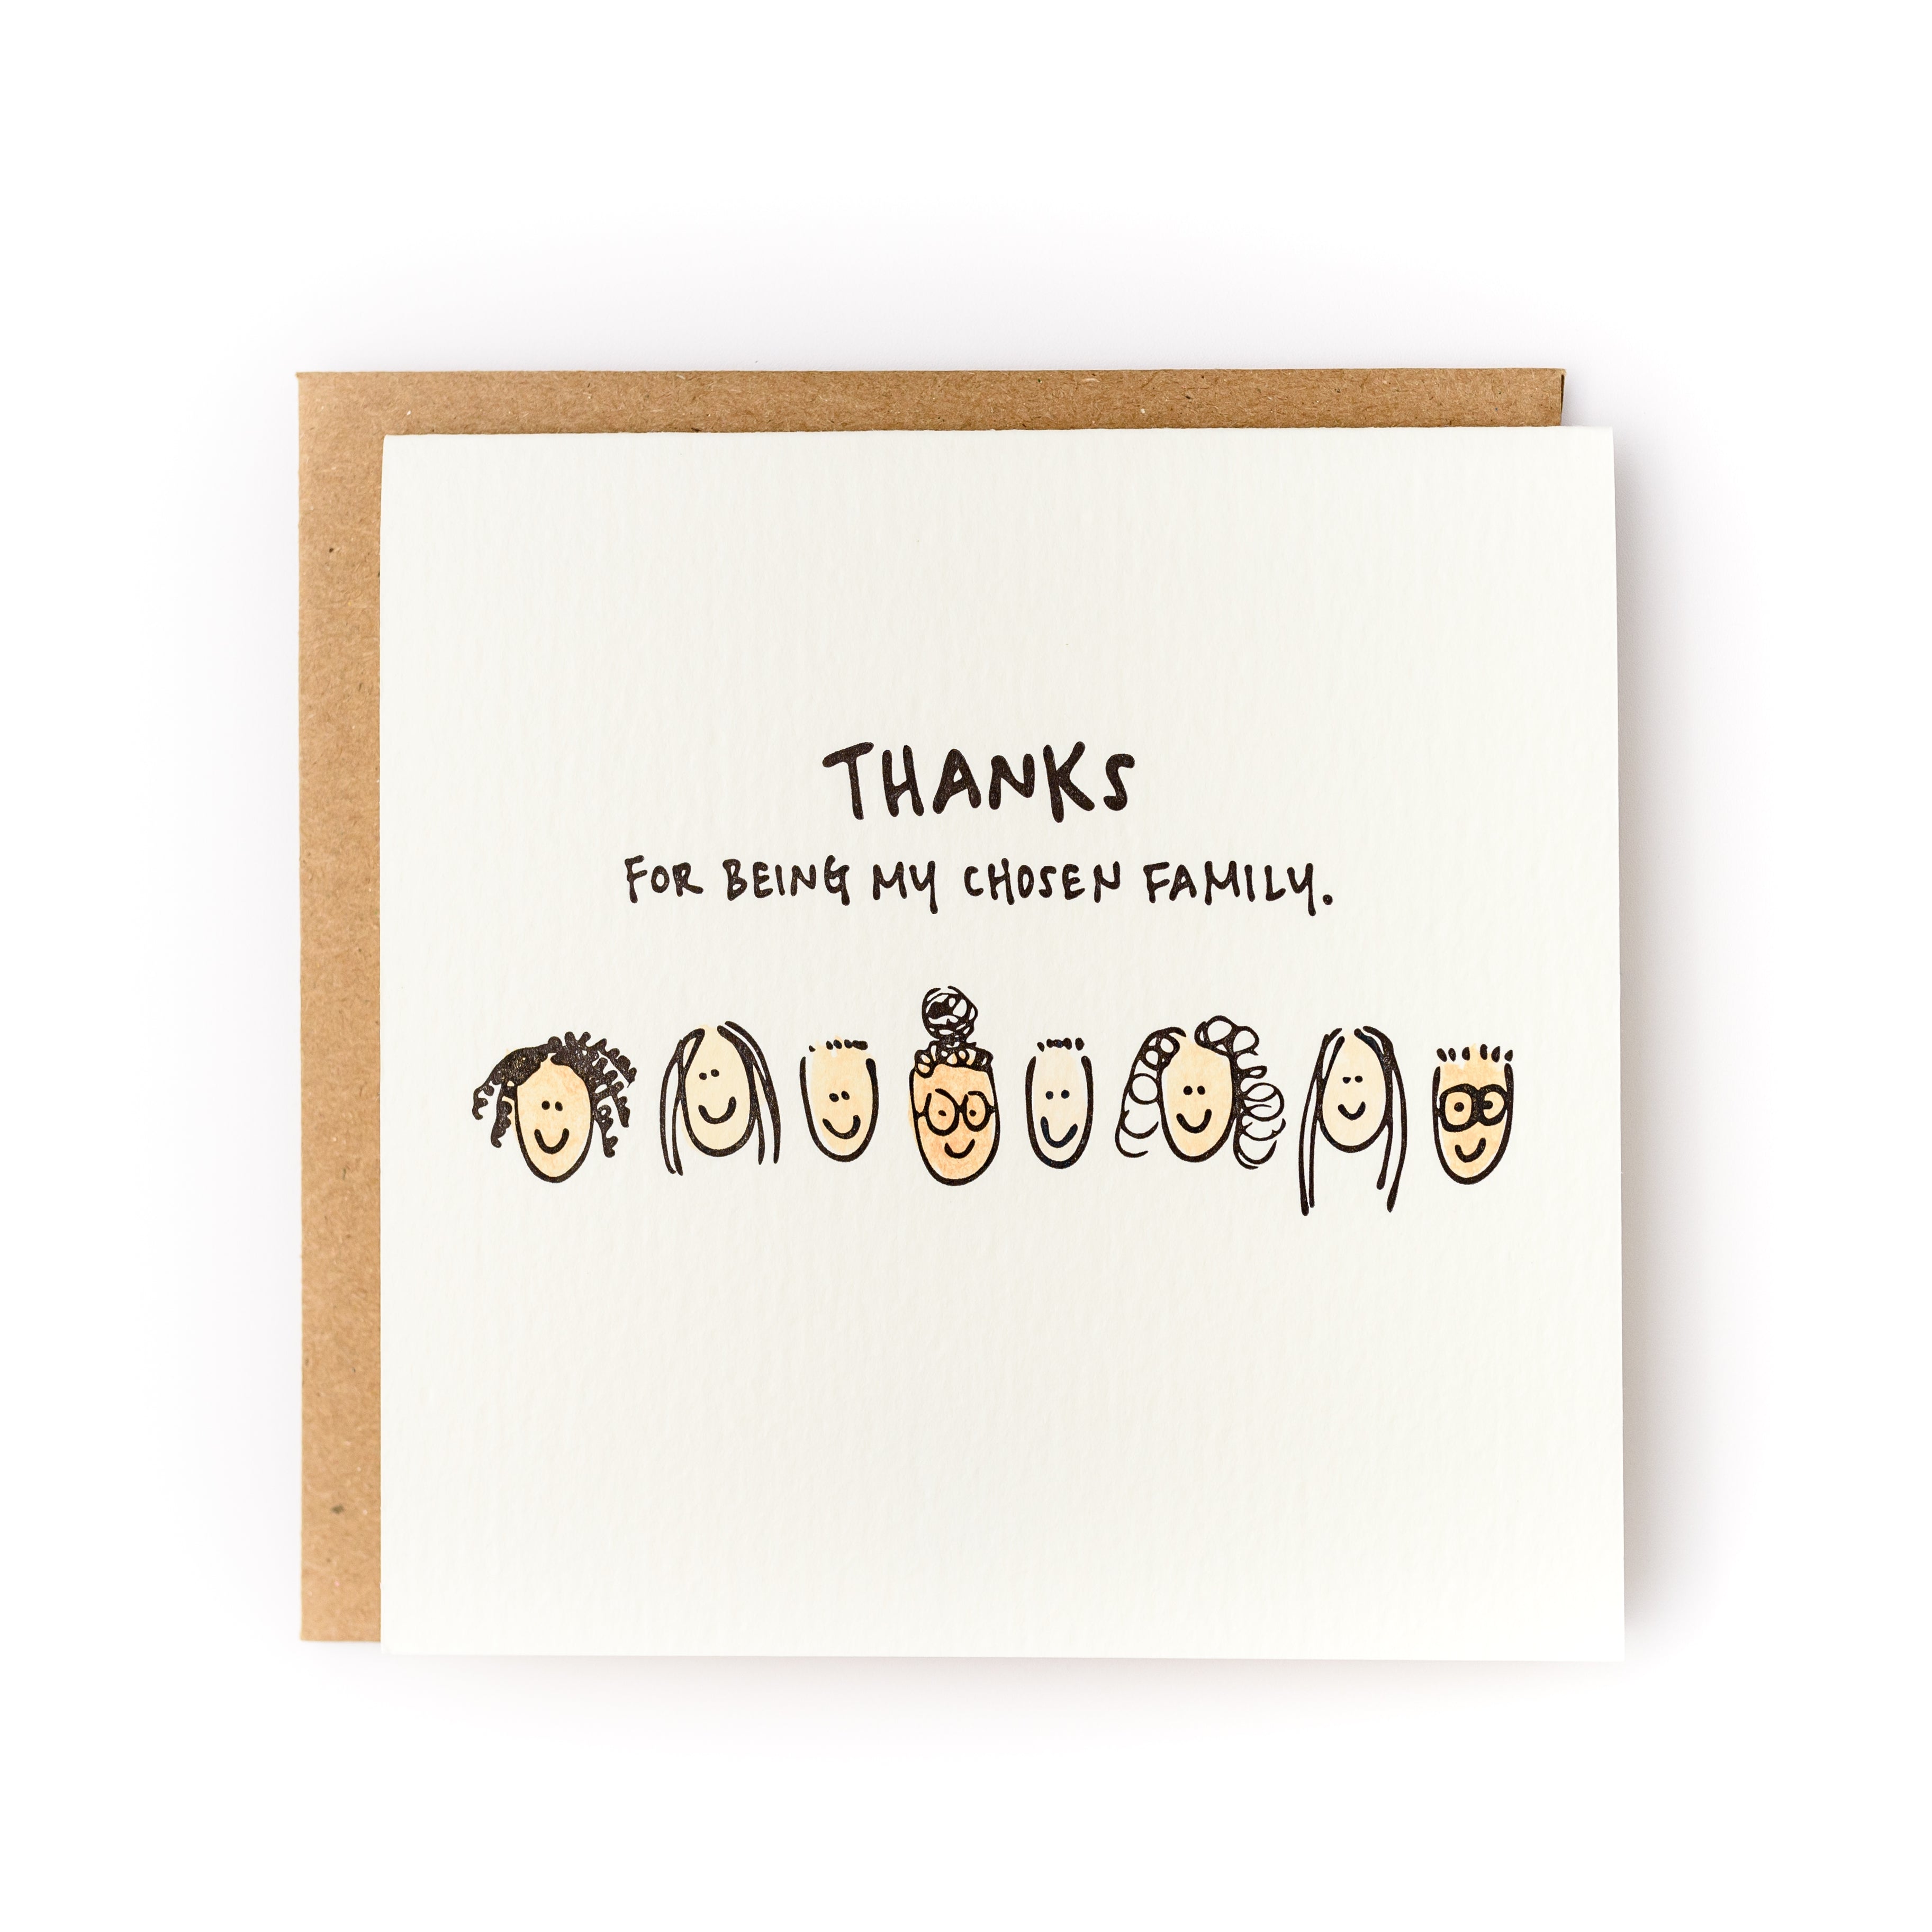 Square white card with black text saying, "Thanks For Being My Chosen Family". Images of several types of people's faces across center of card. A brown envelope is included.